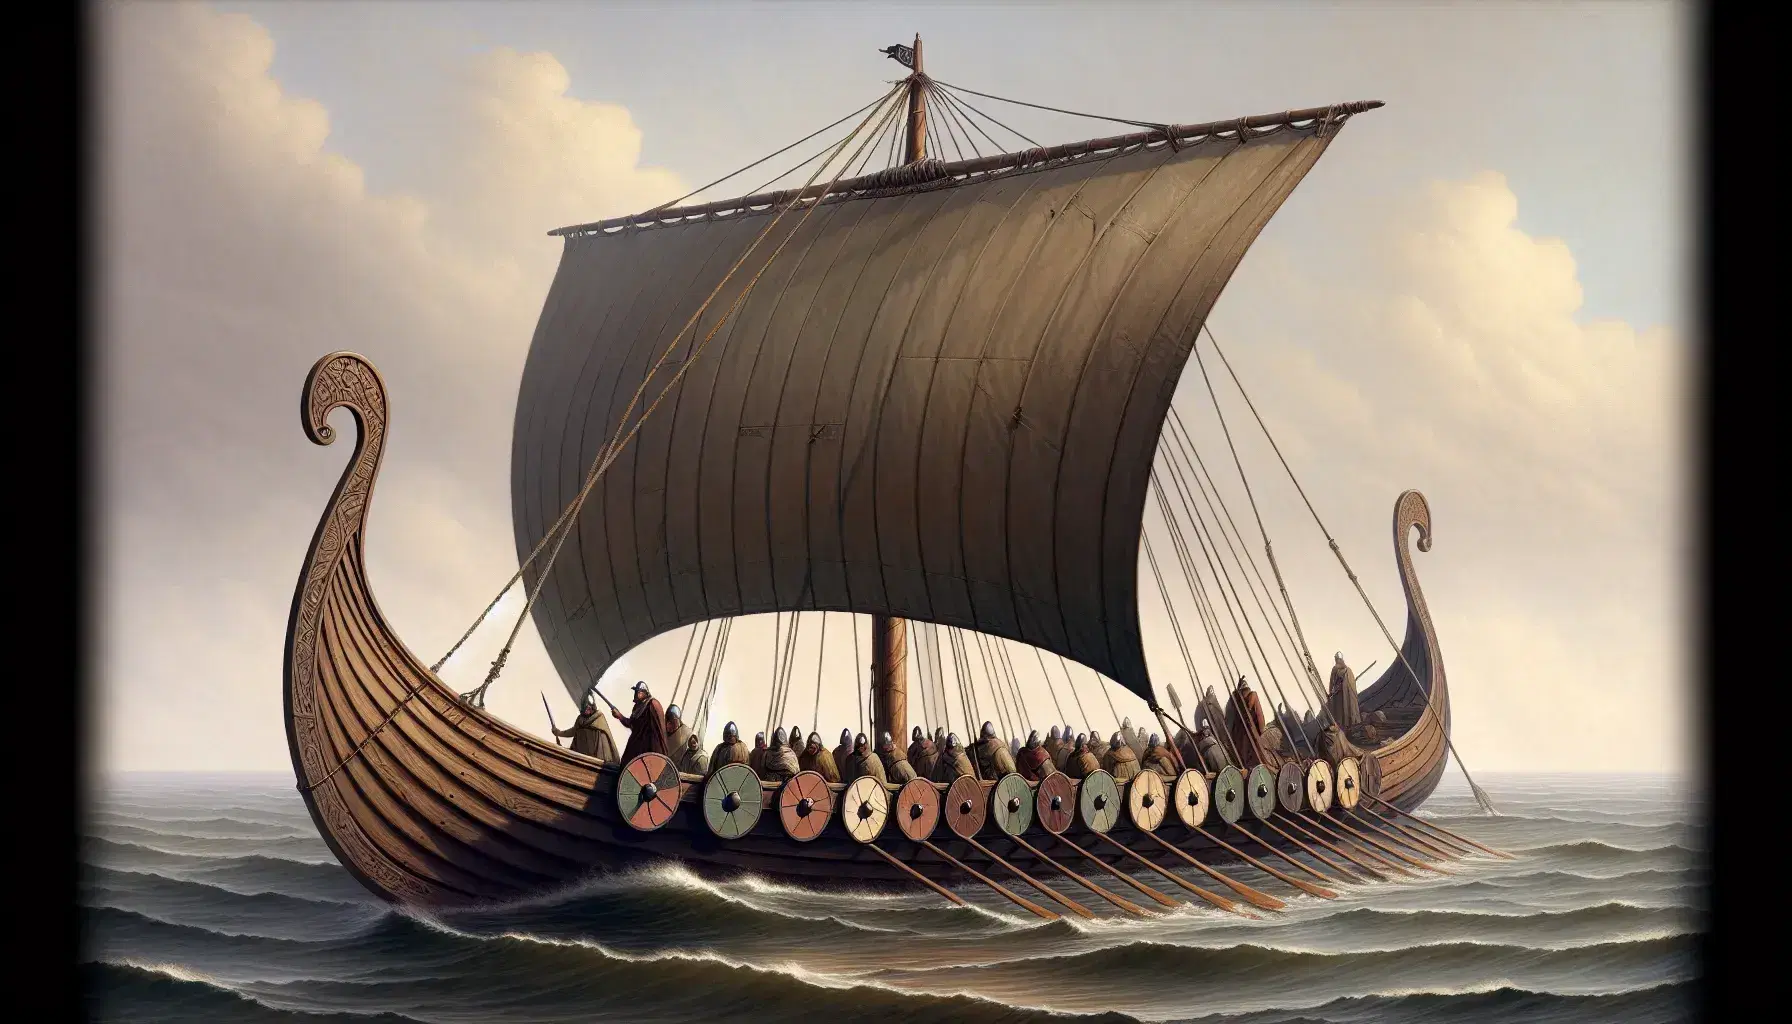 Viking longship with dark oak hull, red and yellow shields, and cream sail on calm sea, crew in period attire, faint coastline in the background.